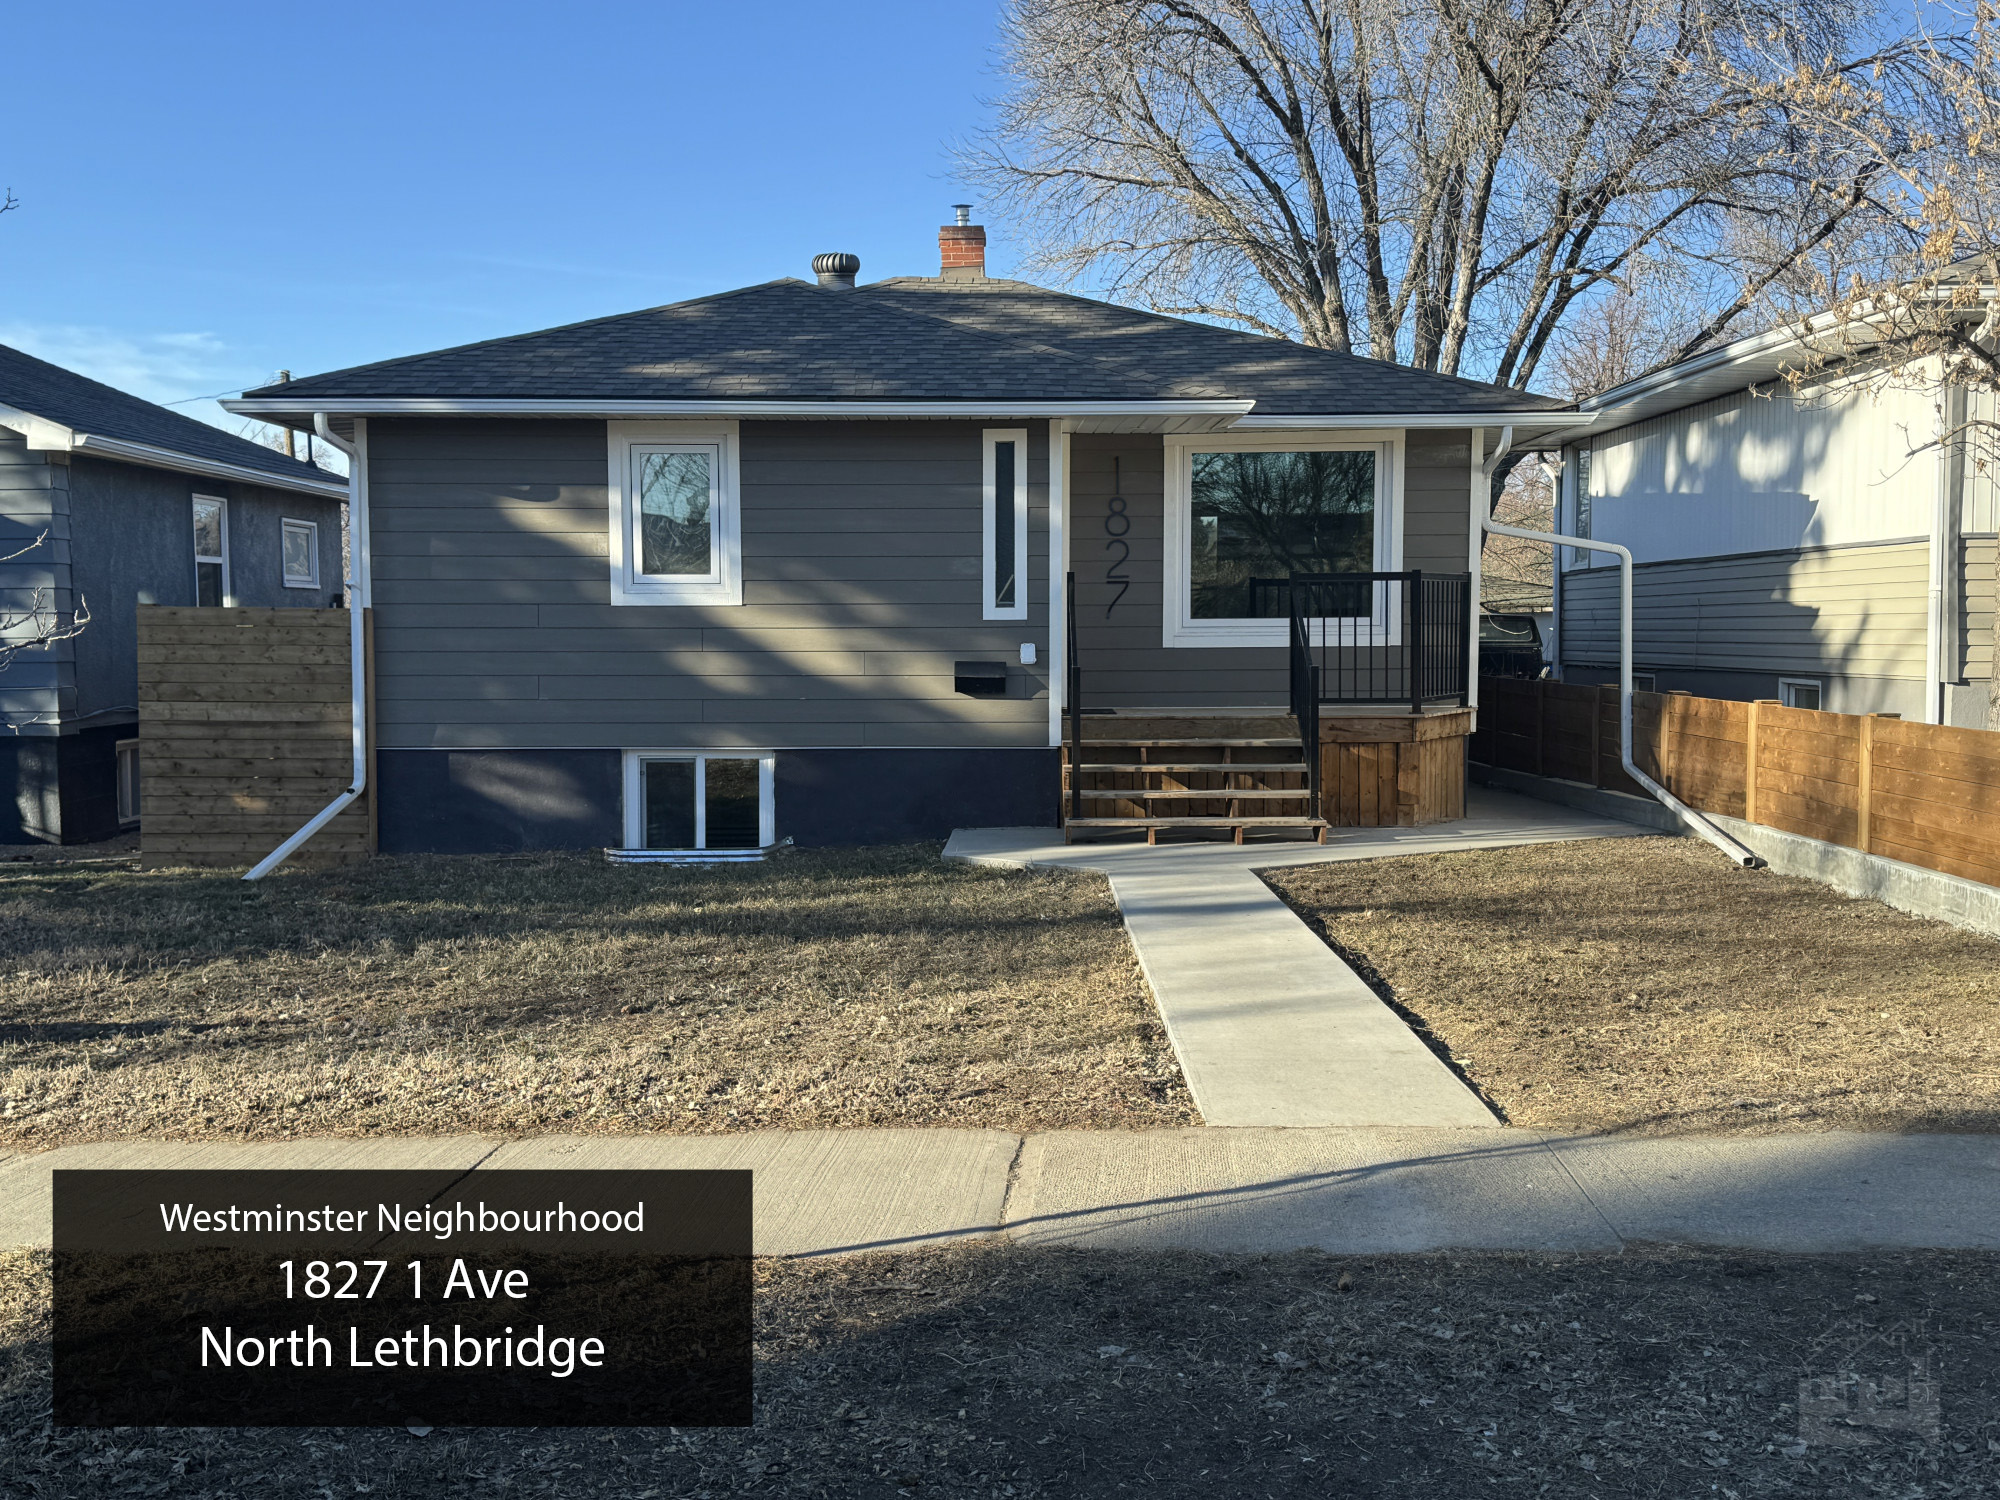 1827 1 Ave North Lethbridge (Lower Suite) Cover image